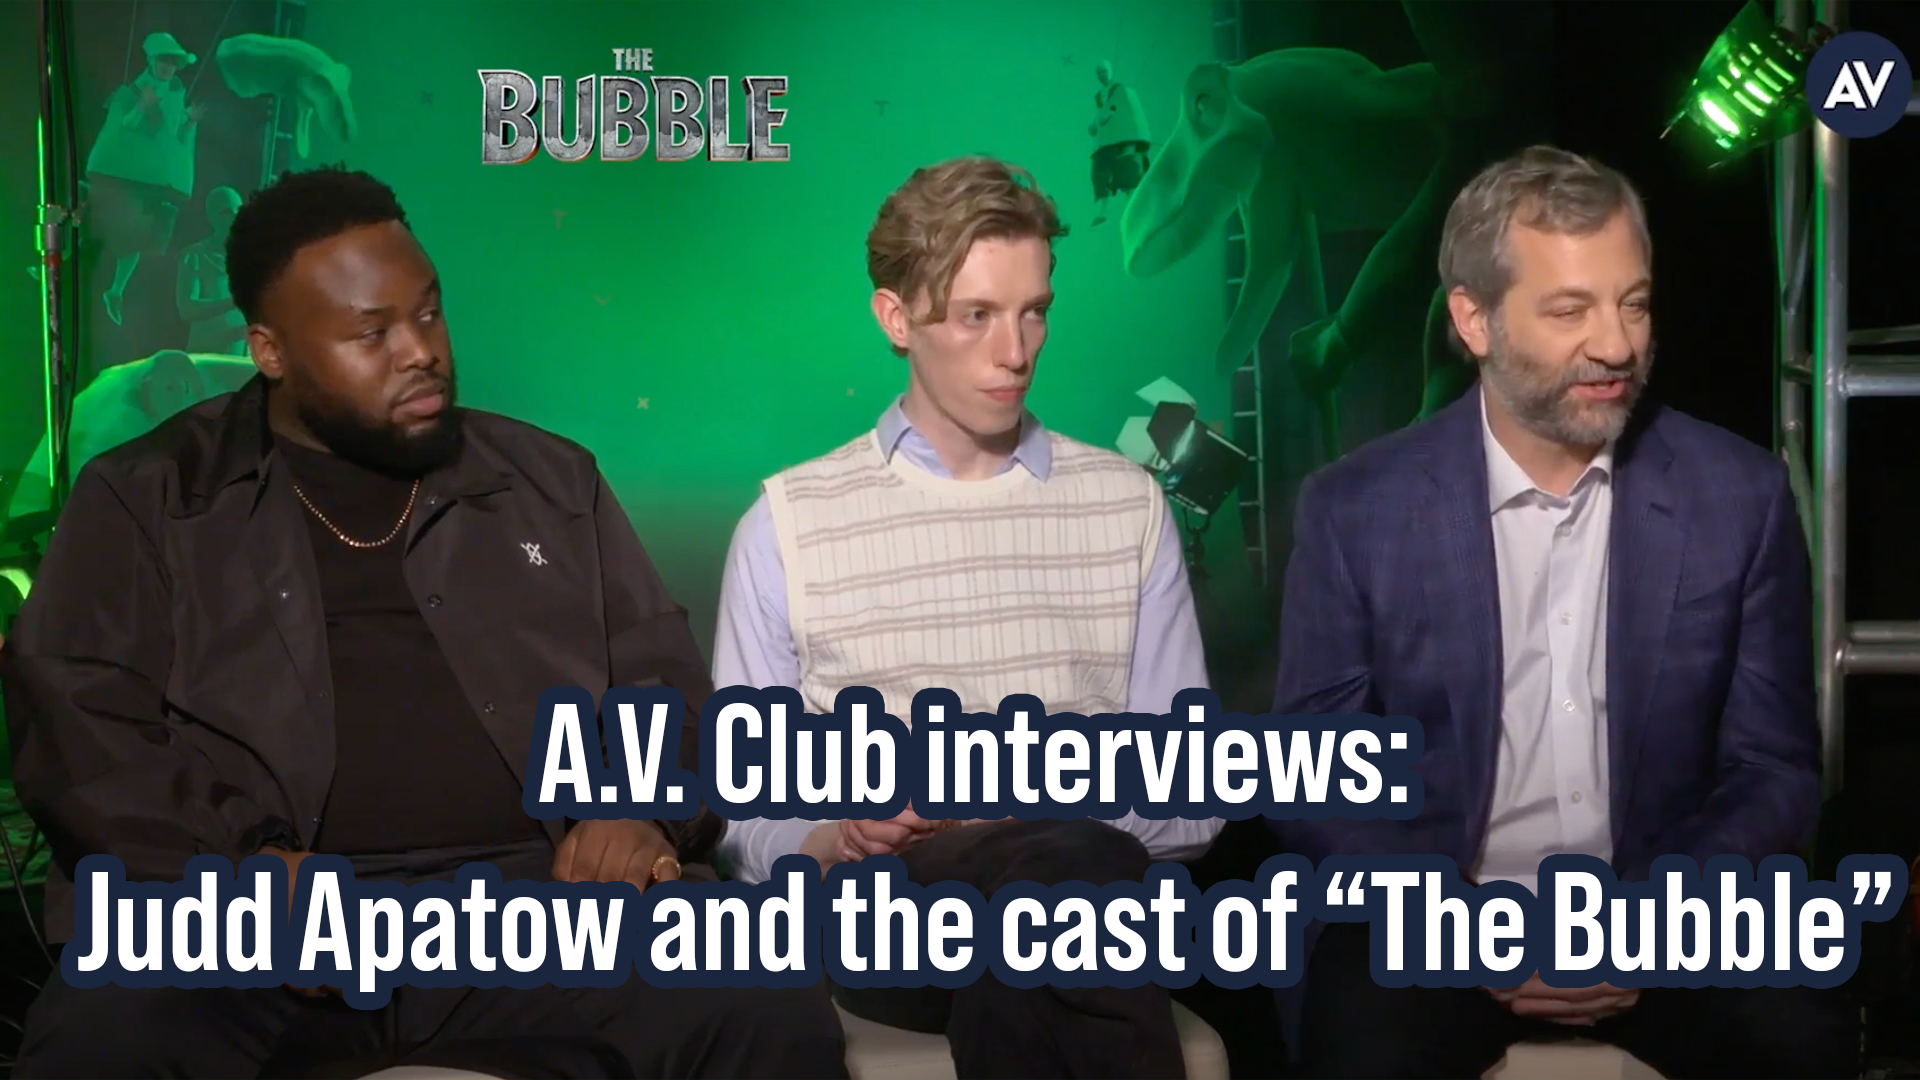 A.V. Club interviews: Judd Apatow and the cast of The Bubble